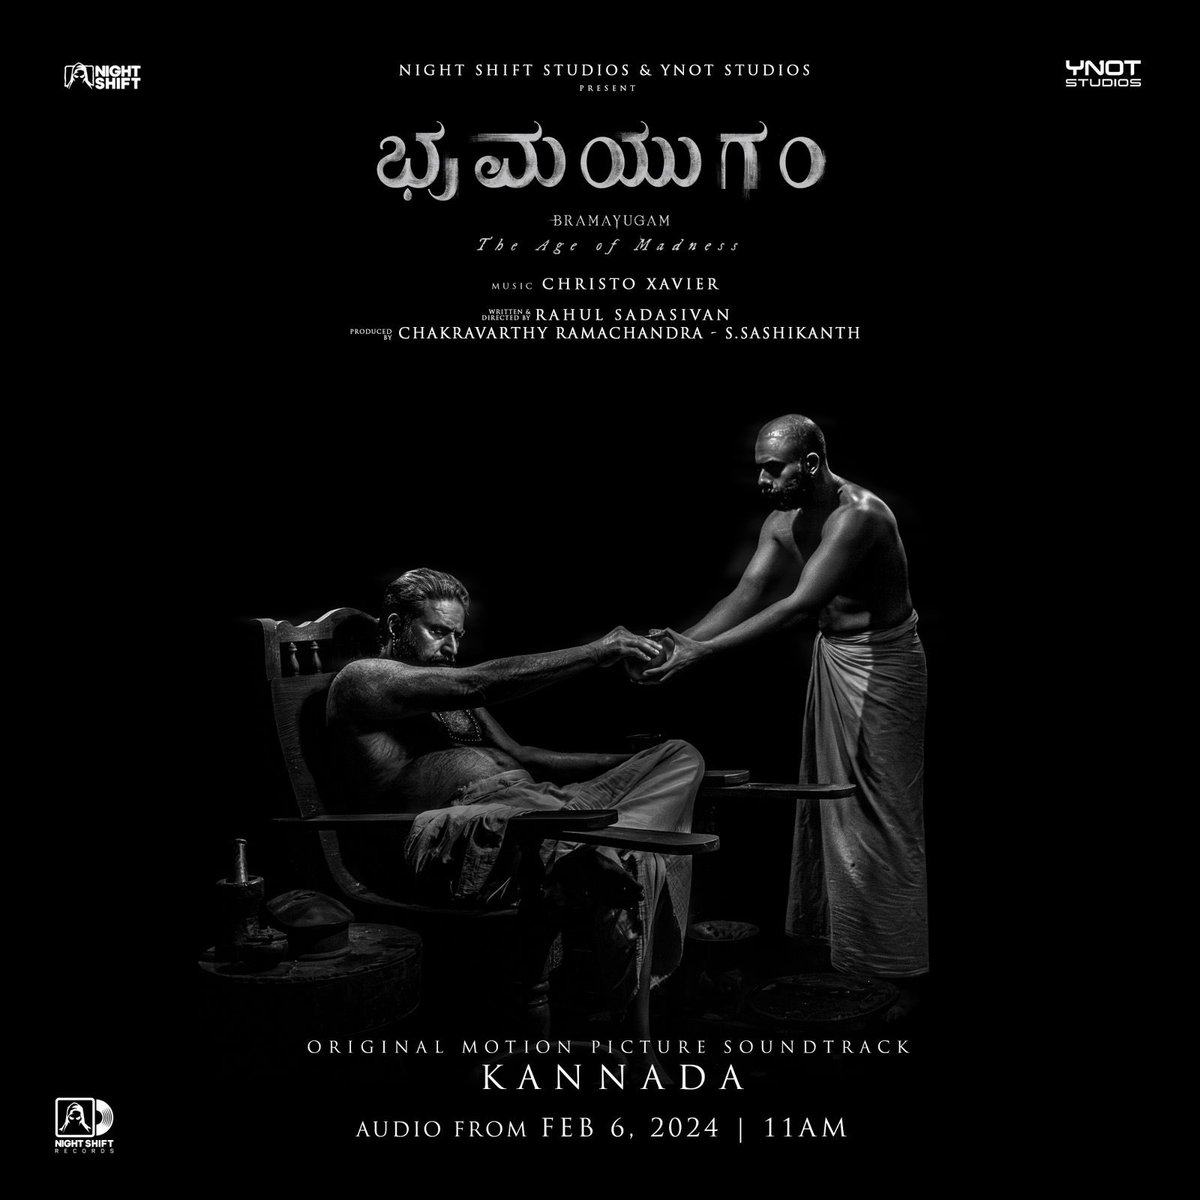 KANNADA - #BramayugamKannada AUDIO FROM 11AM TOMORROW on YouTube and all major streaming platforms !

Music By #ChristoXavier
Lyrics : #VManohar
Singers : @saivigneshsings,
#Atheena (The Beginning), #SayanthS , #ChristoXavier (The Age of Madness)
Mixed & Mastered by #AbinPaul in…